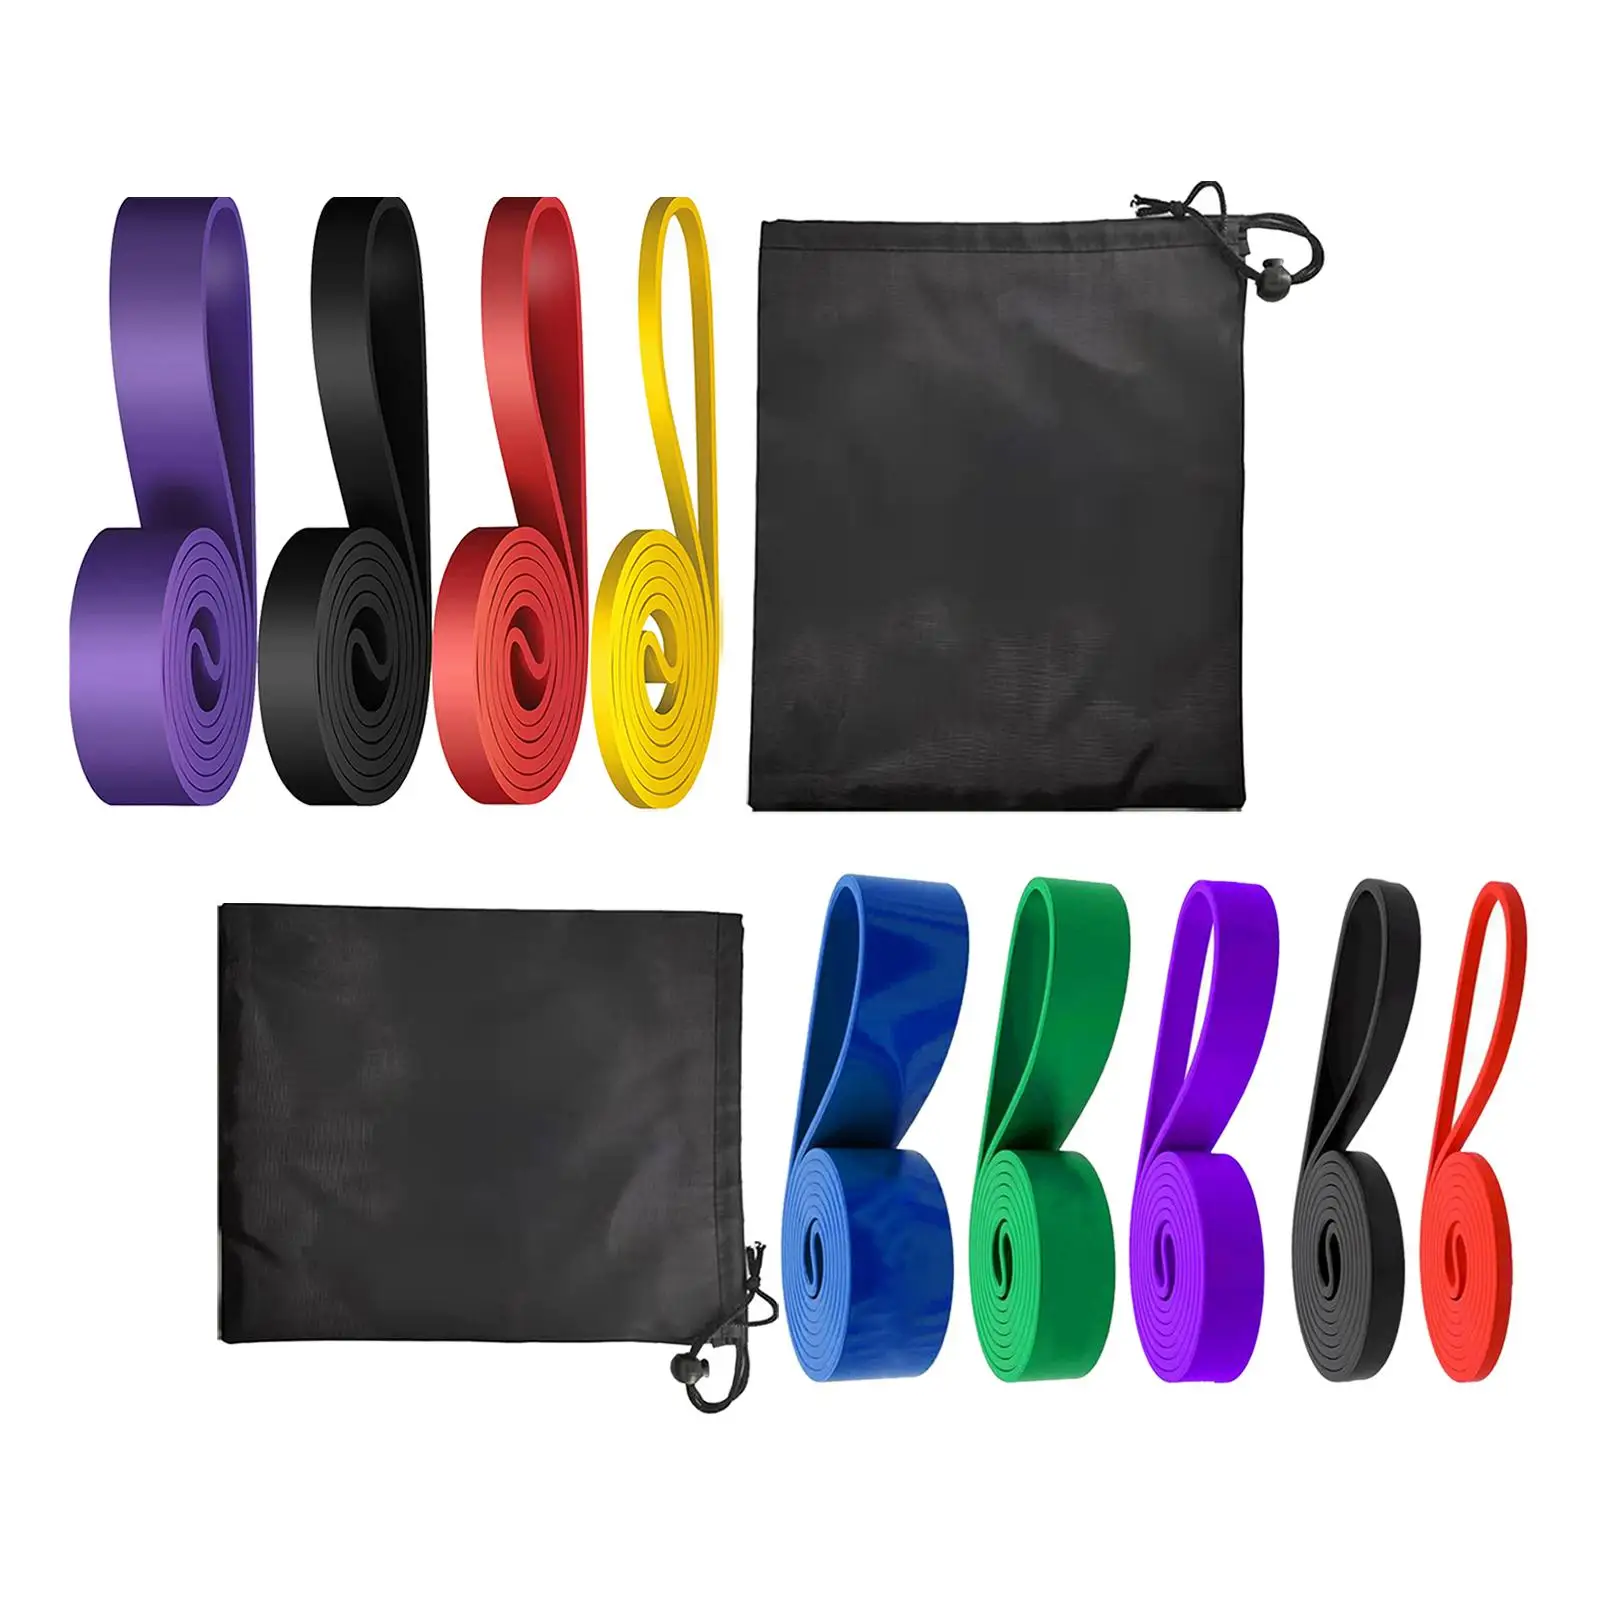 Resistance Bands Strength Training Pull up Assist Bands with Storage Bag Men Women Exercise Bands Workout Bands for Working Out